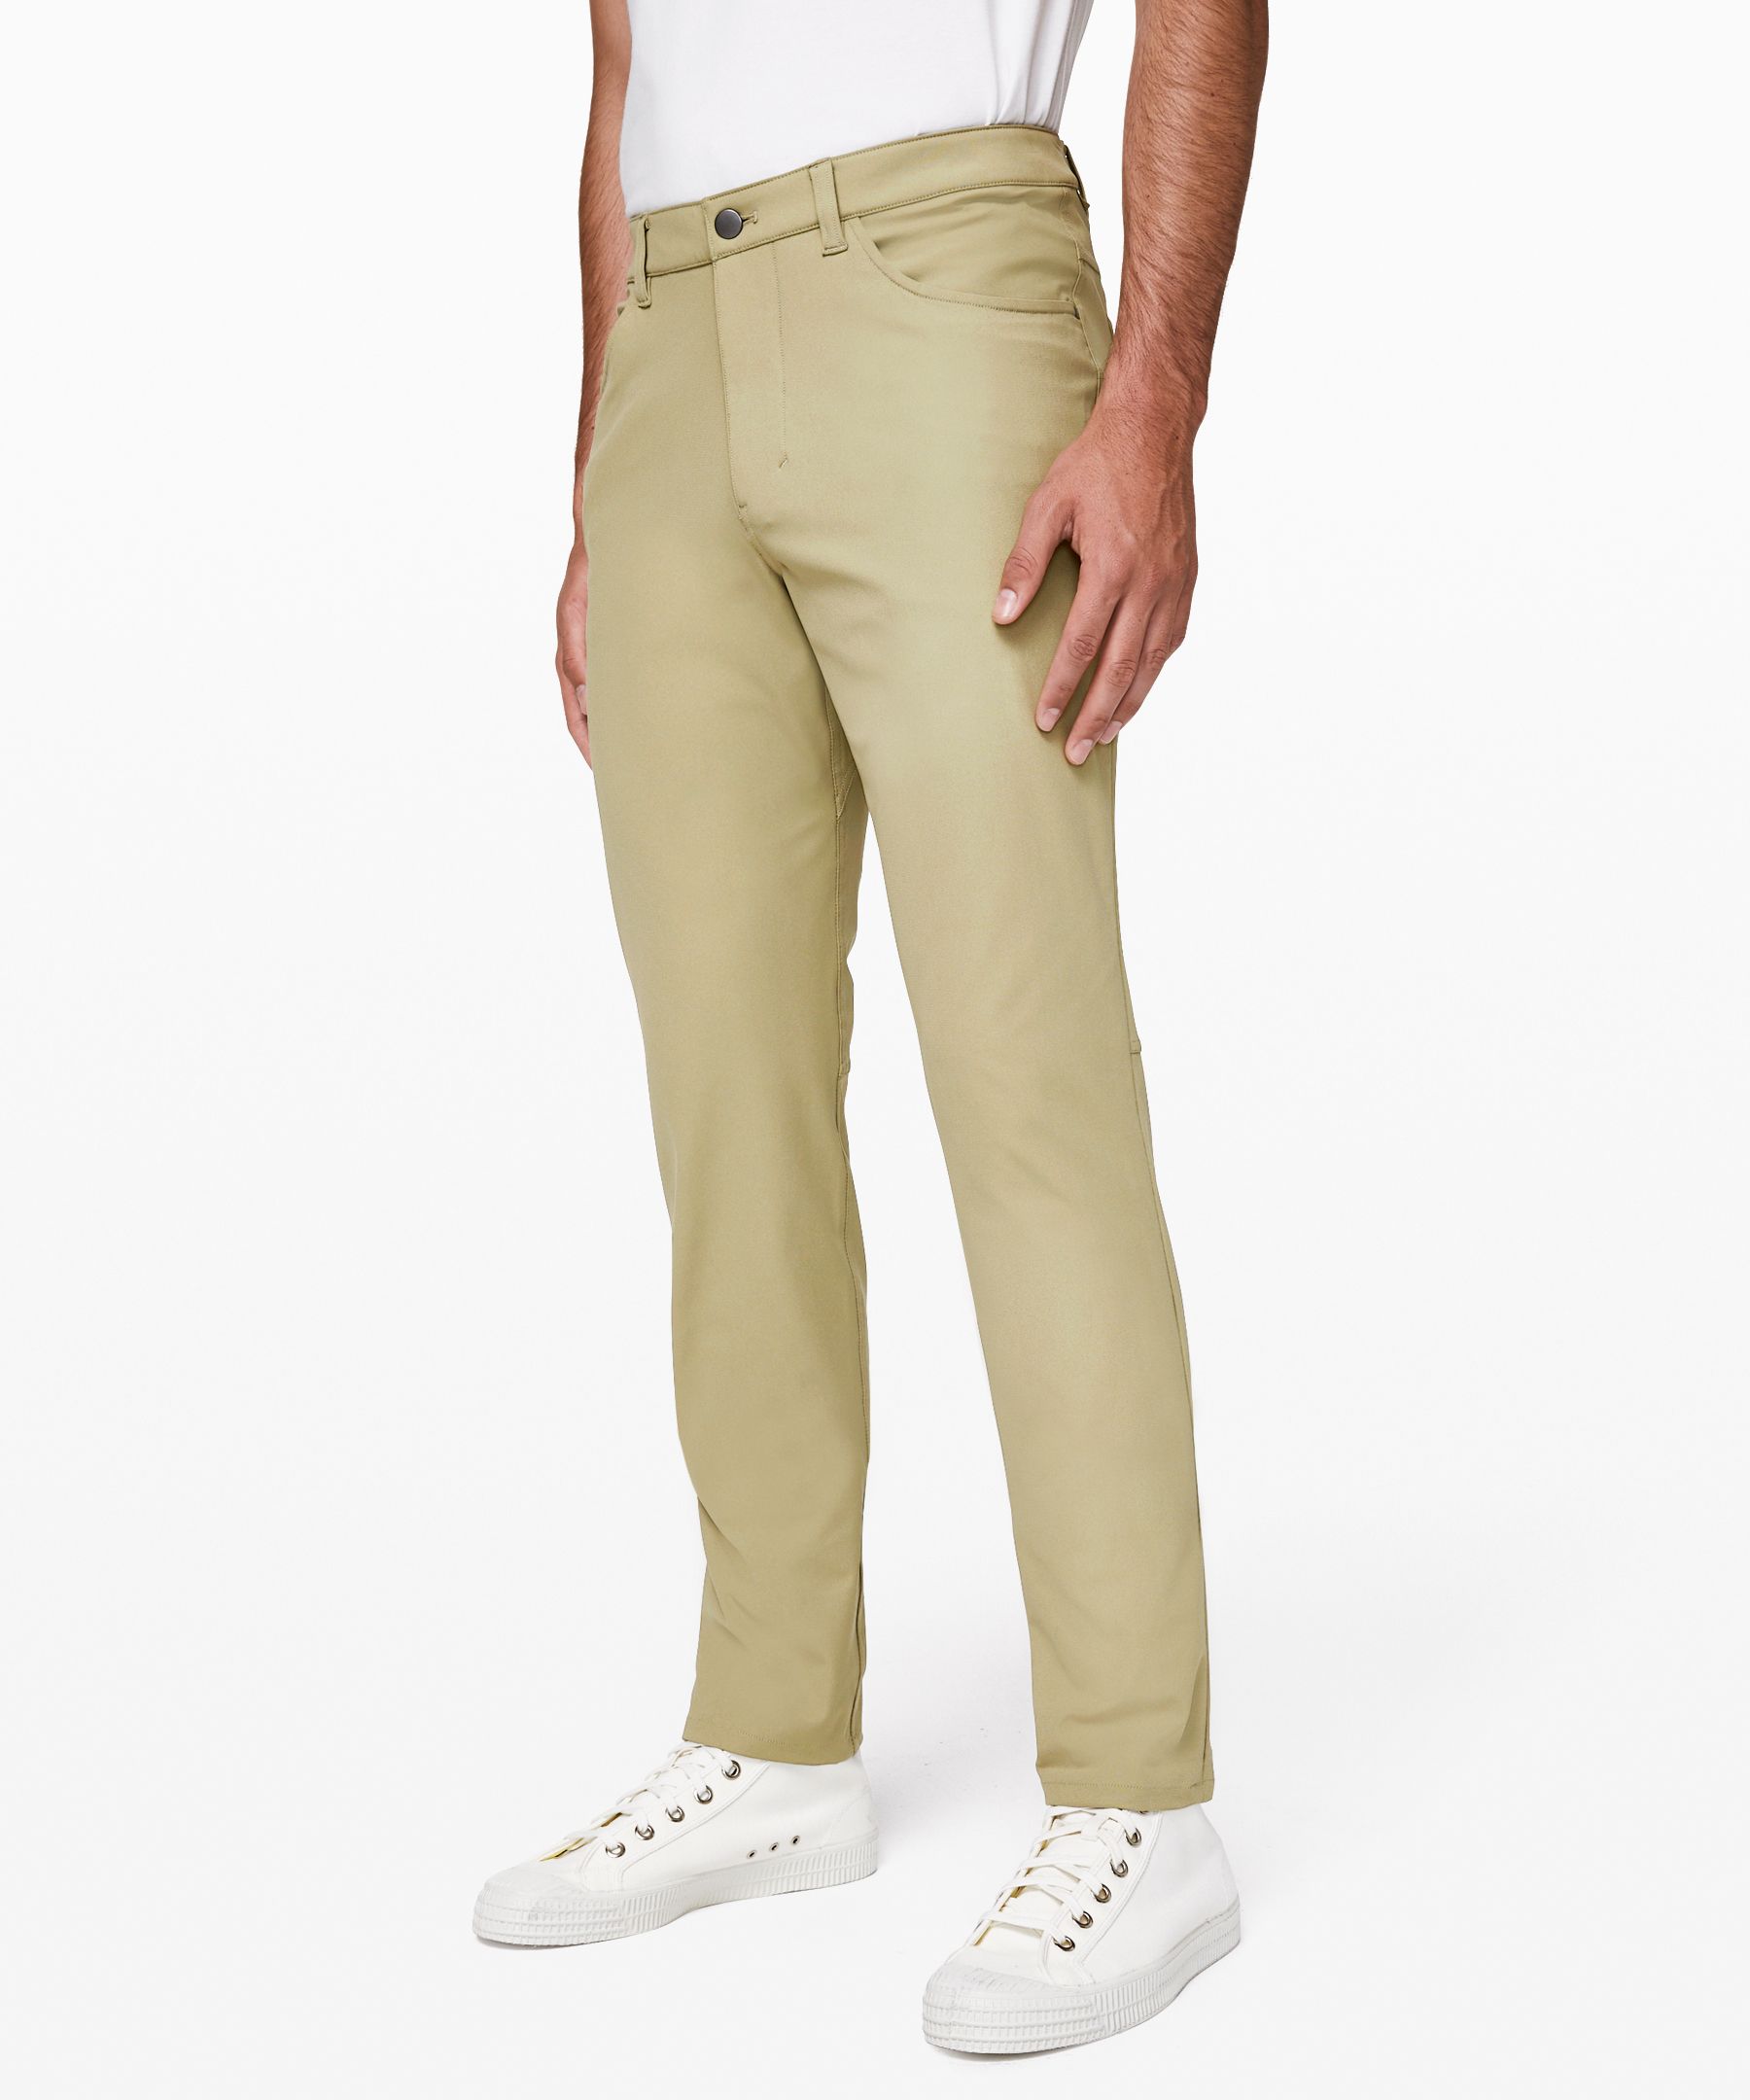 Lululemon Abc Classic-fit Pants 34" Warpstreme In Tofino Sand